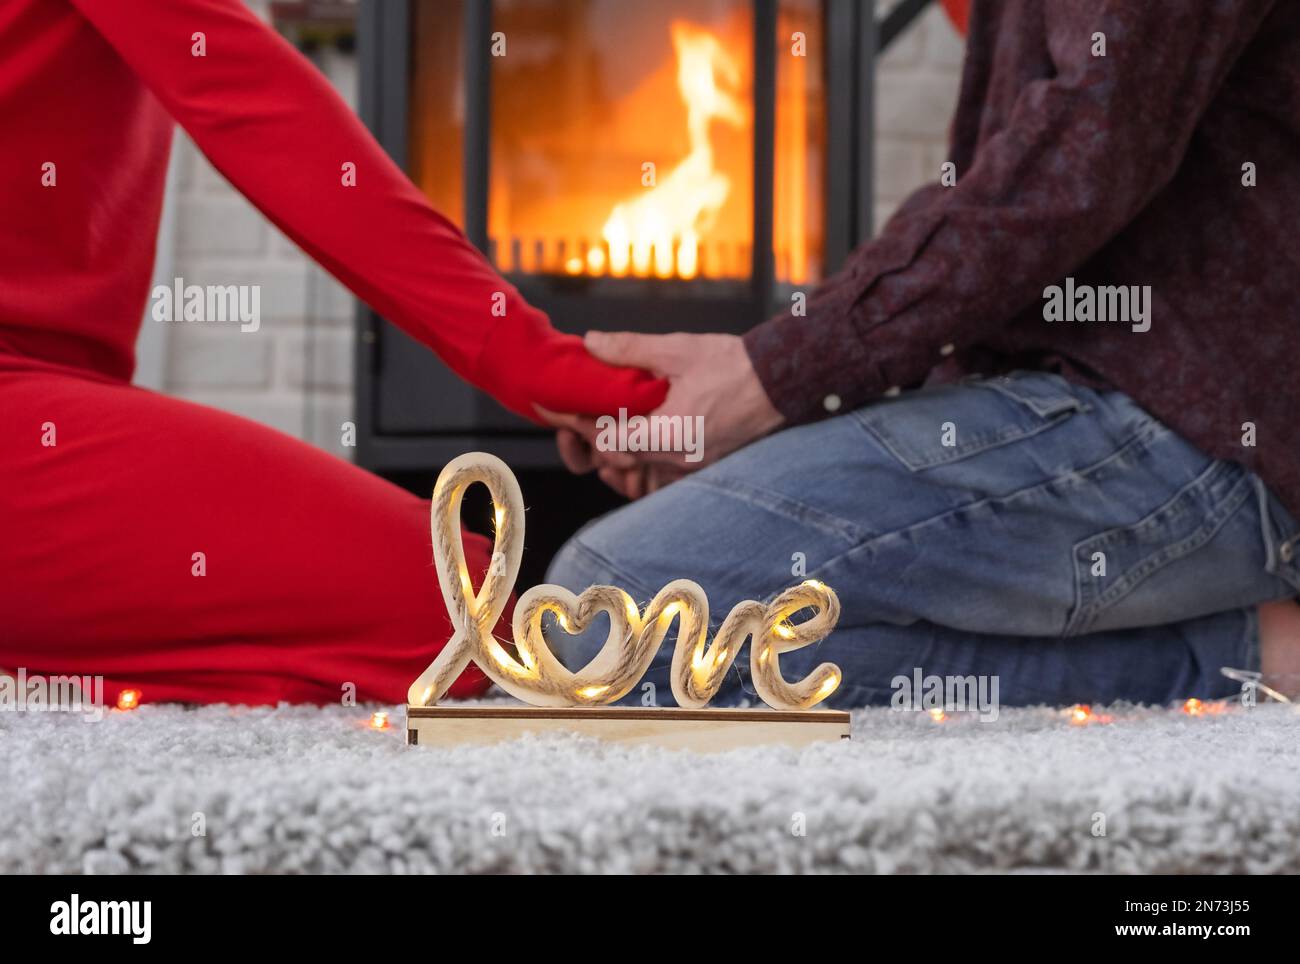 Man and woman in love date at home are sitting near the fireplace stove with a burning fire on a cozy rug. Valentine's Day, happy couple, love story, Stock Photo